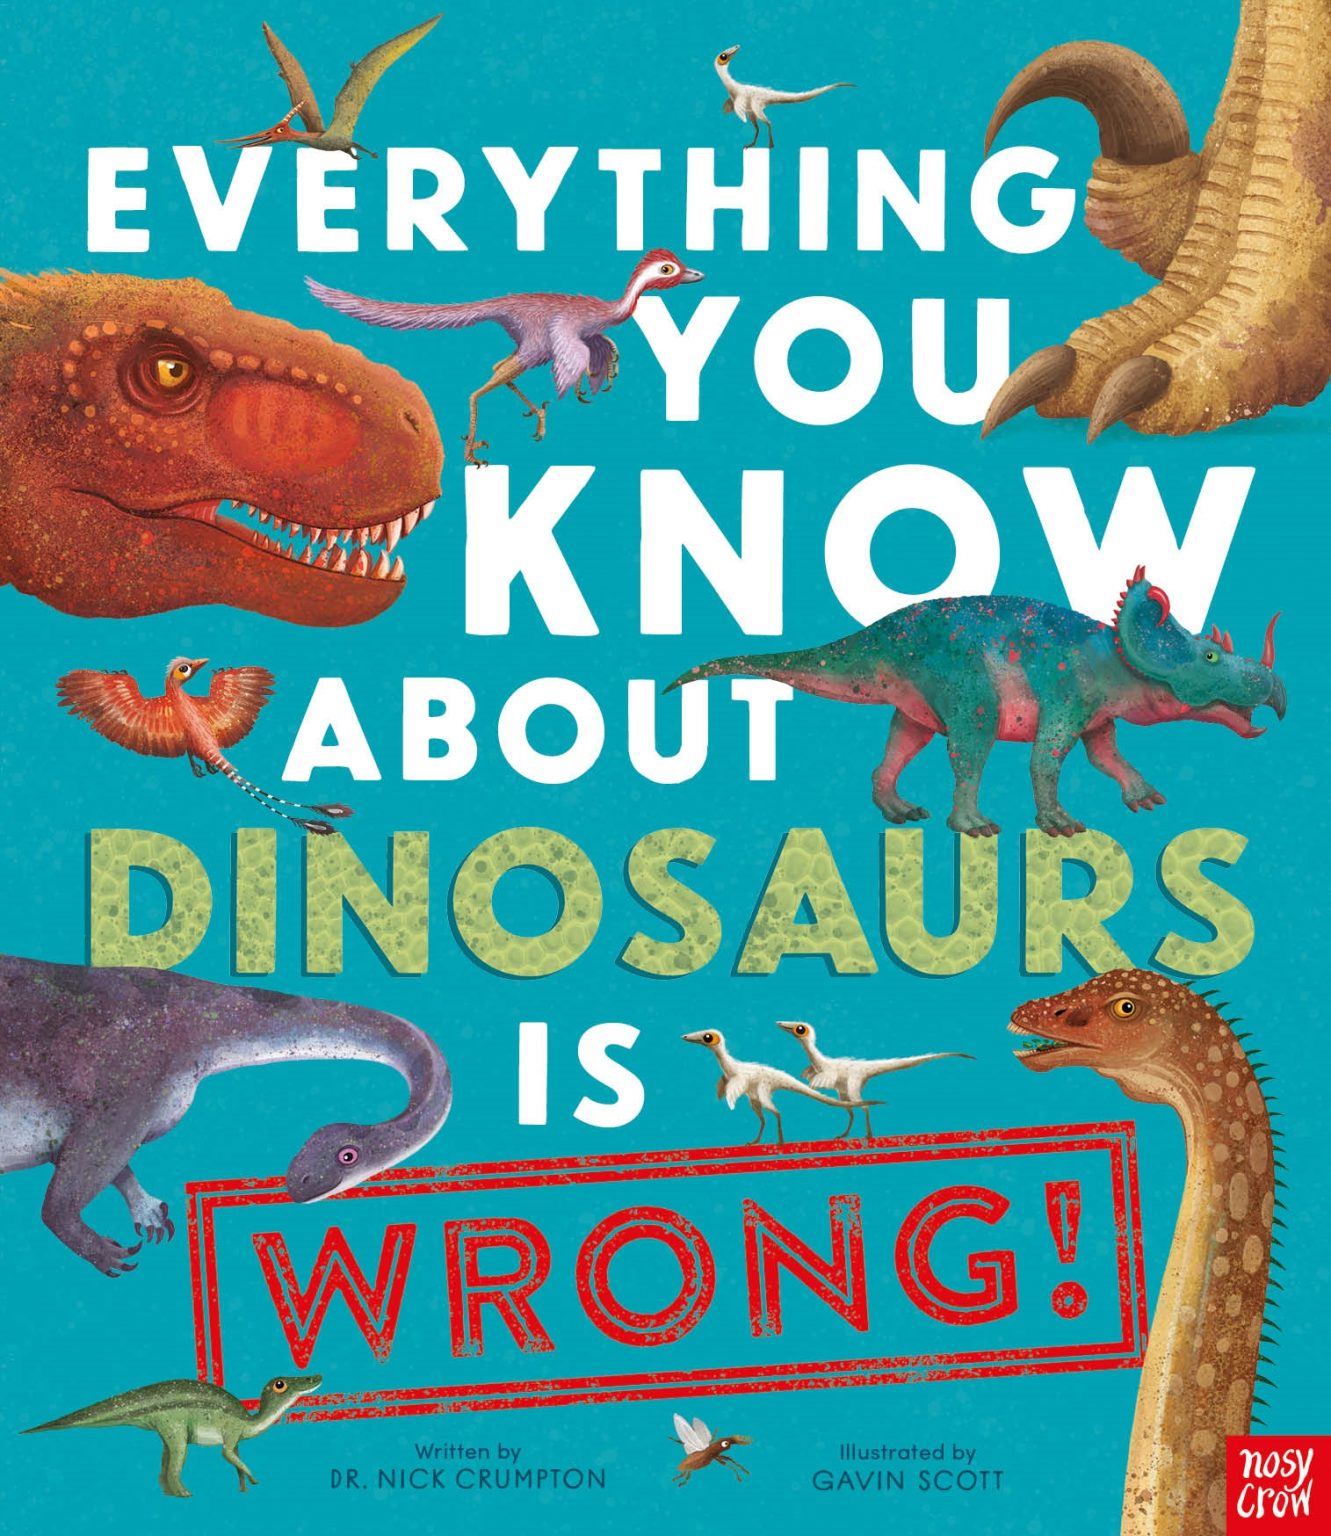 Nosy Crow: Everything You Know About Dinosaurs is WRONG!